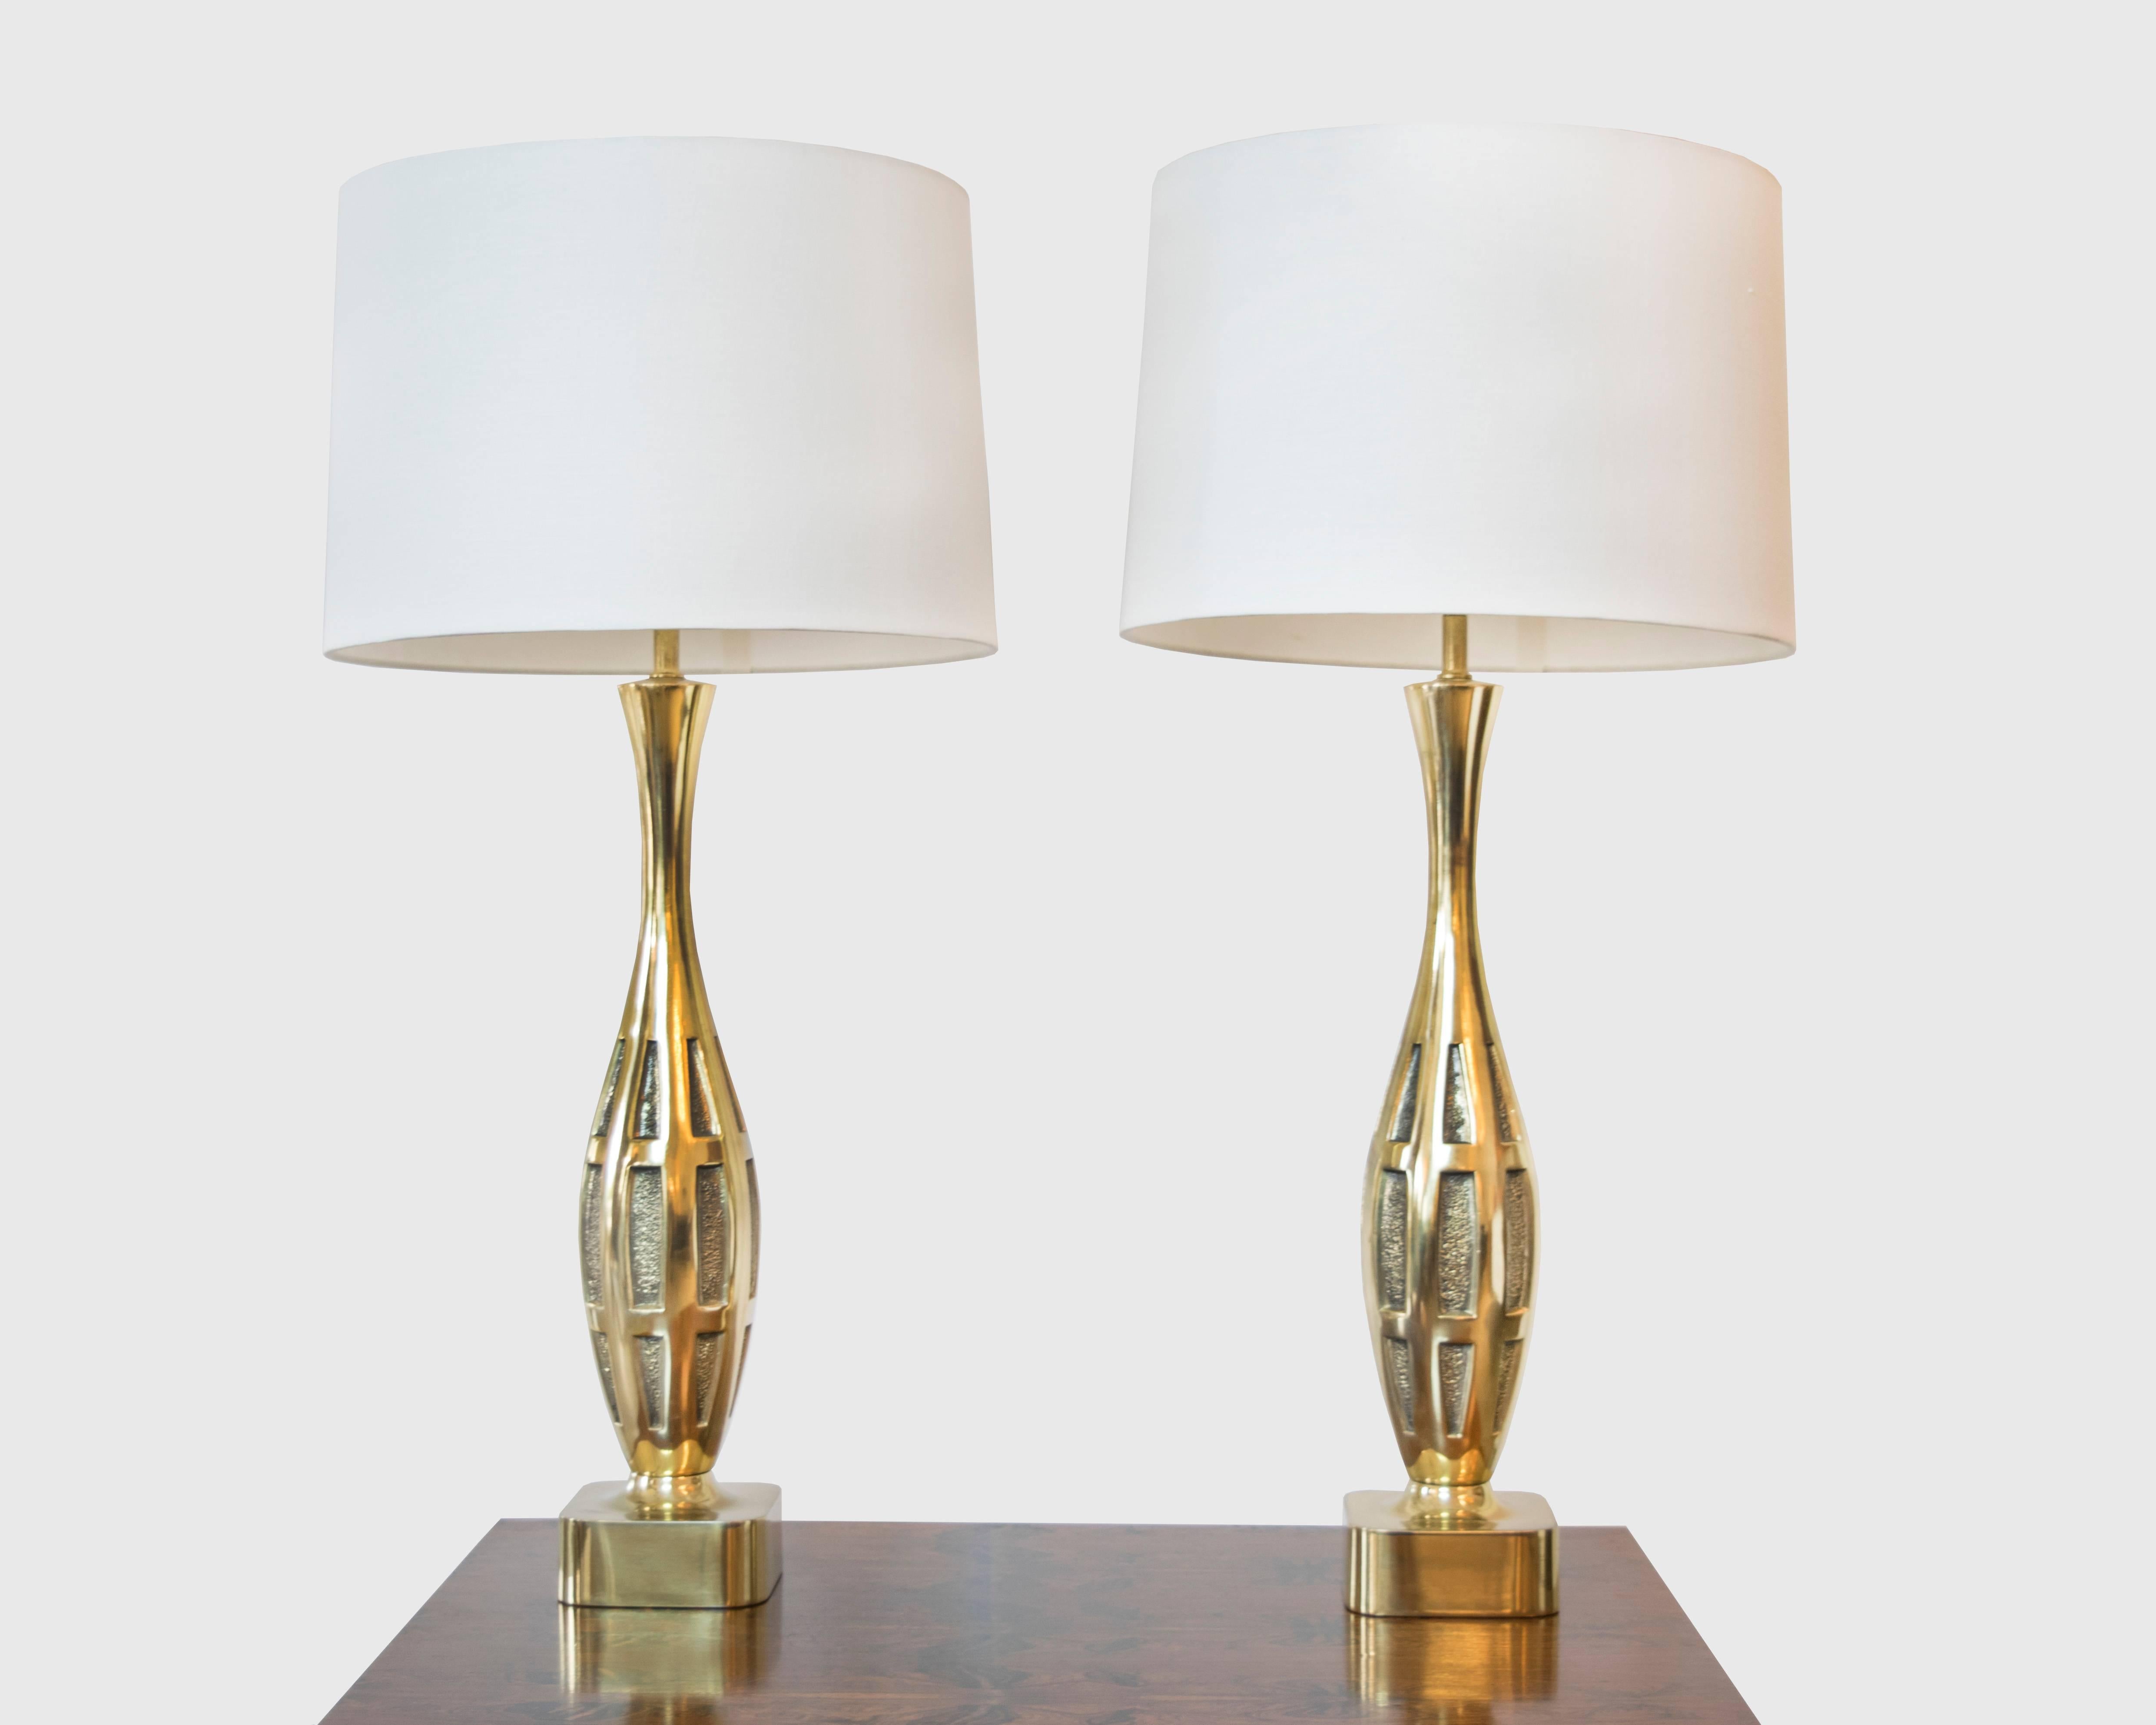 This is a graceful pair of brass two toned lamps by Tony Paul for Westwood with an elegant bowling pin base. We've never seen another pair like it.